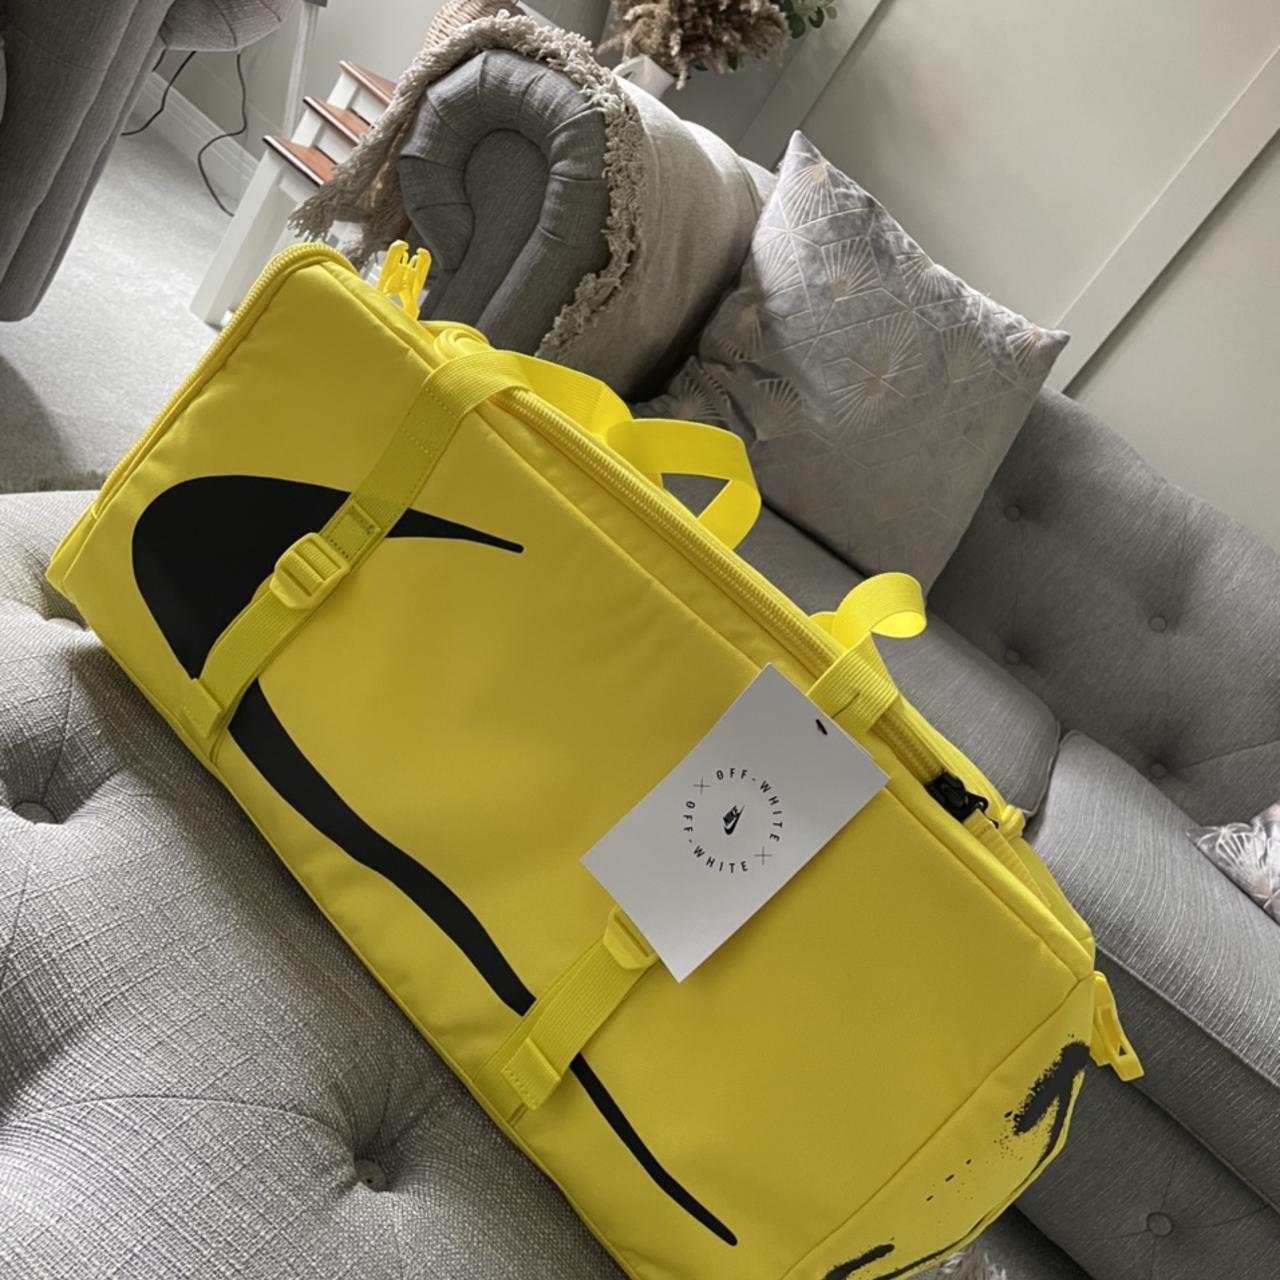 *Open to offers* OFF-WHITE x Nike Duffle/Waist Bag